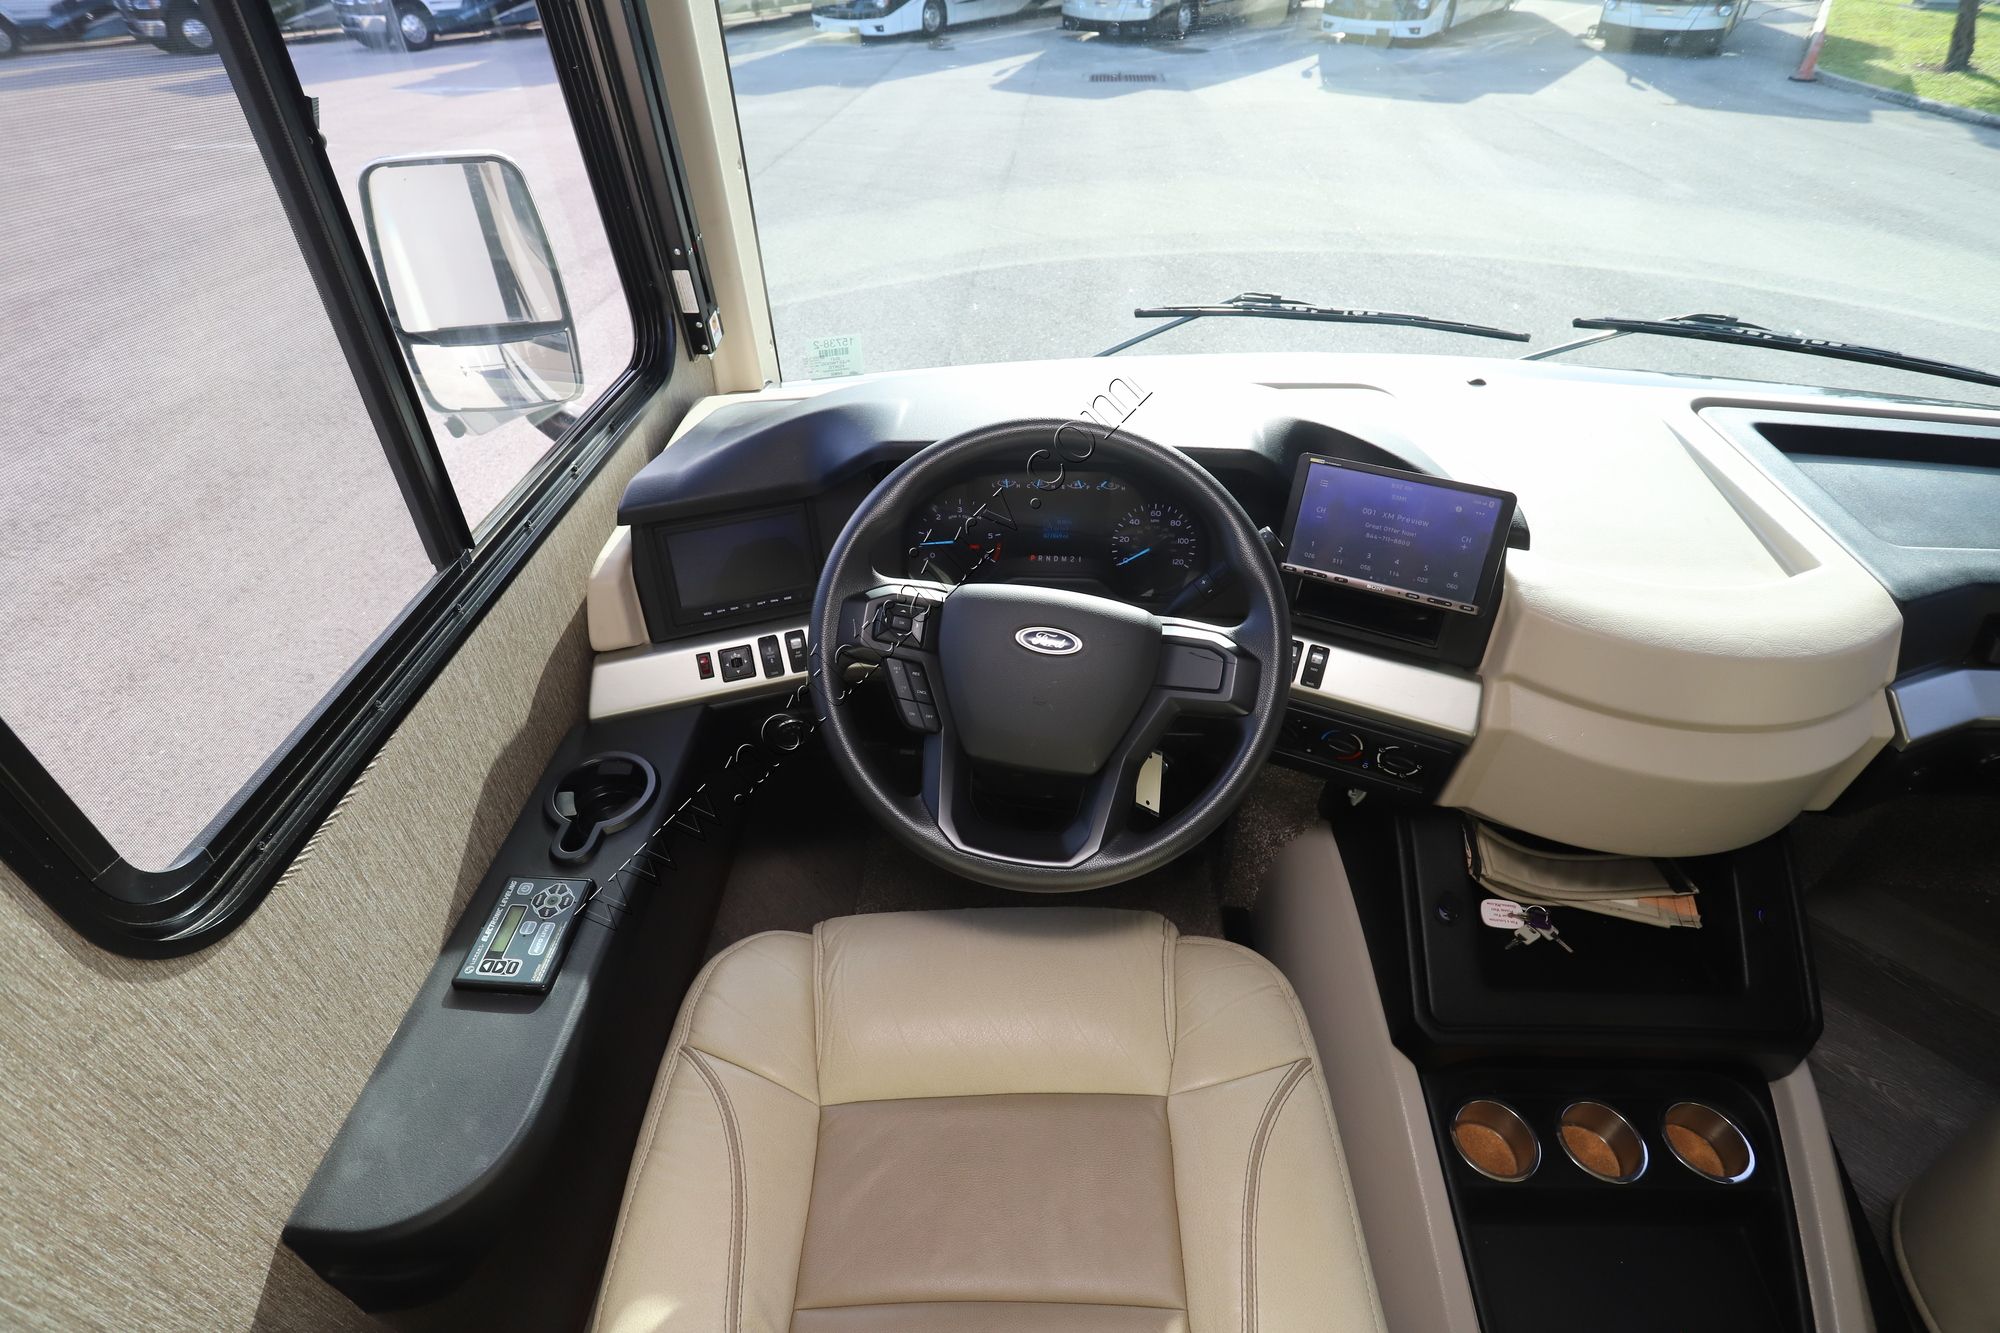 Used 2021 Fleetwood Fortis 34MB Class A  For Sale